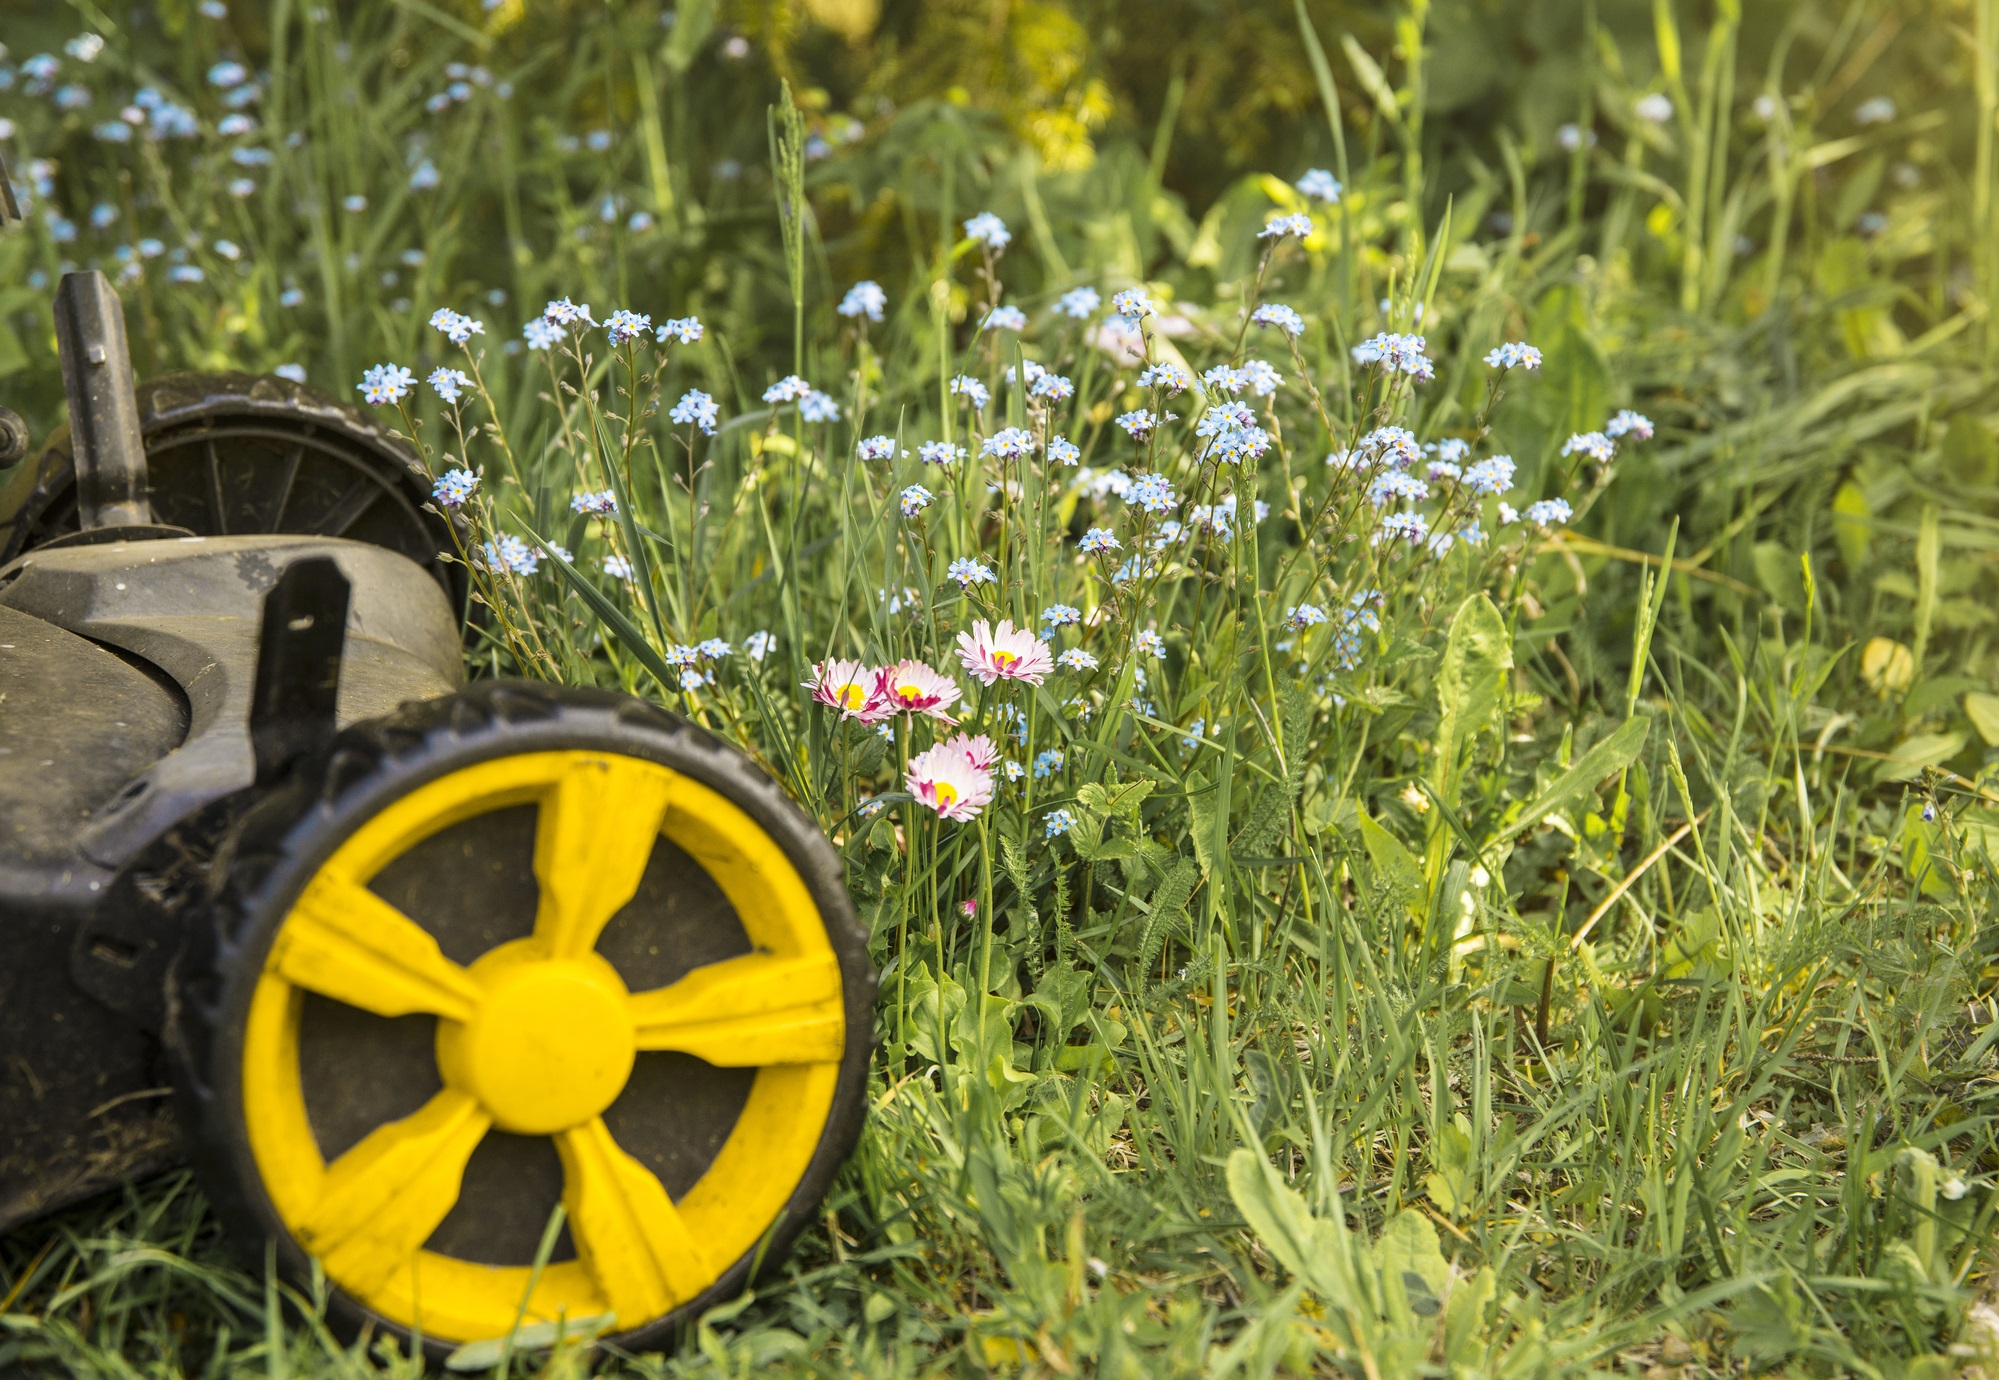 Cities are letting plants go wild for ‘No Mow May’